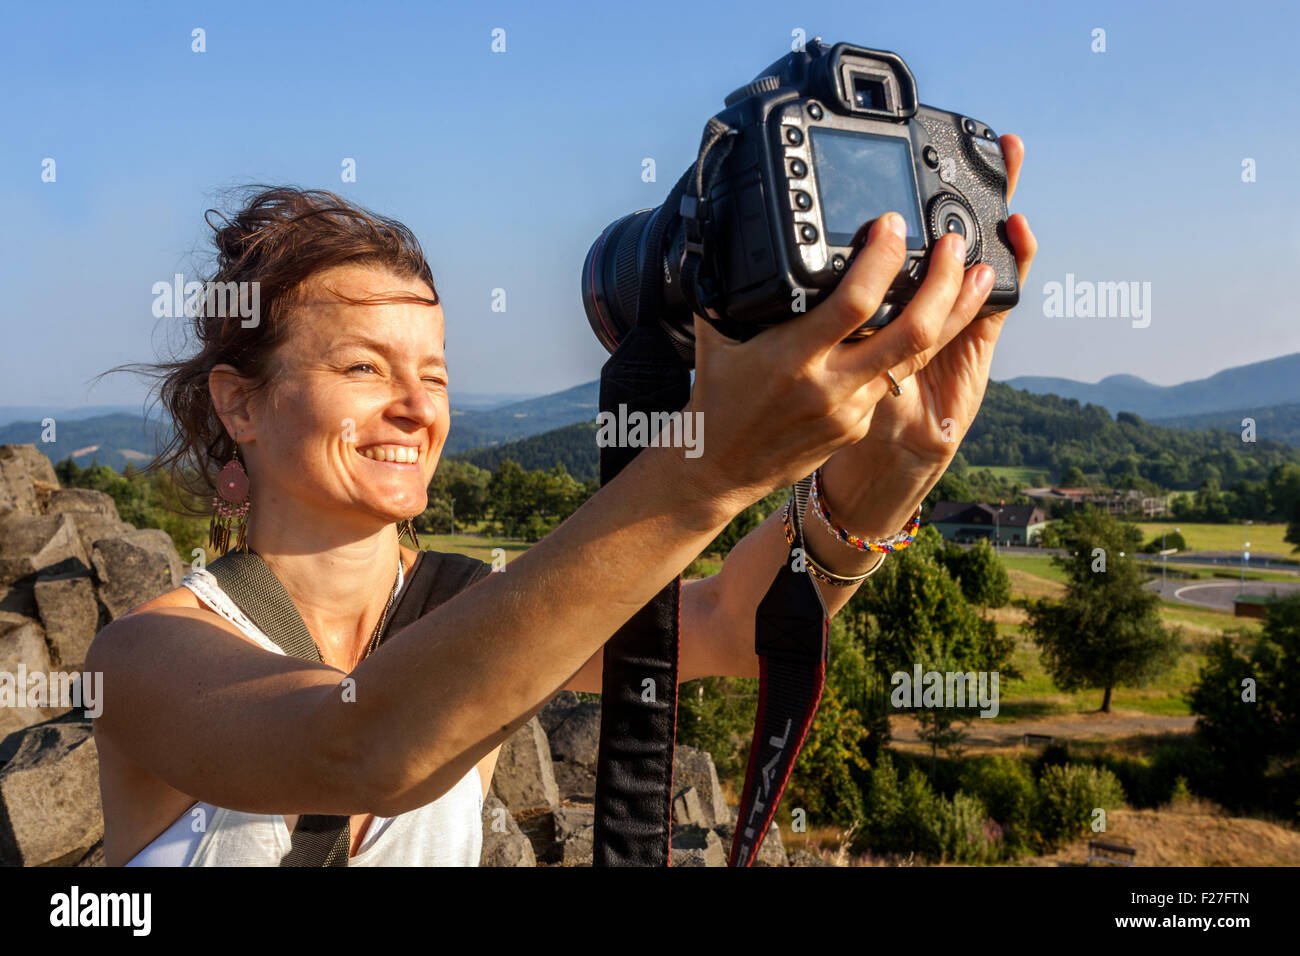 Woman taking selfie with a camera Stock Photo